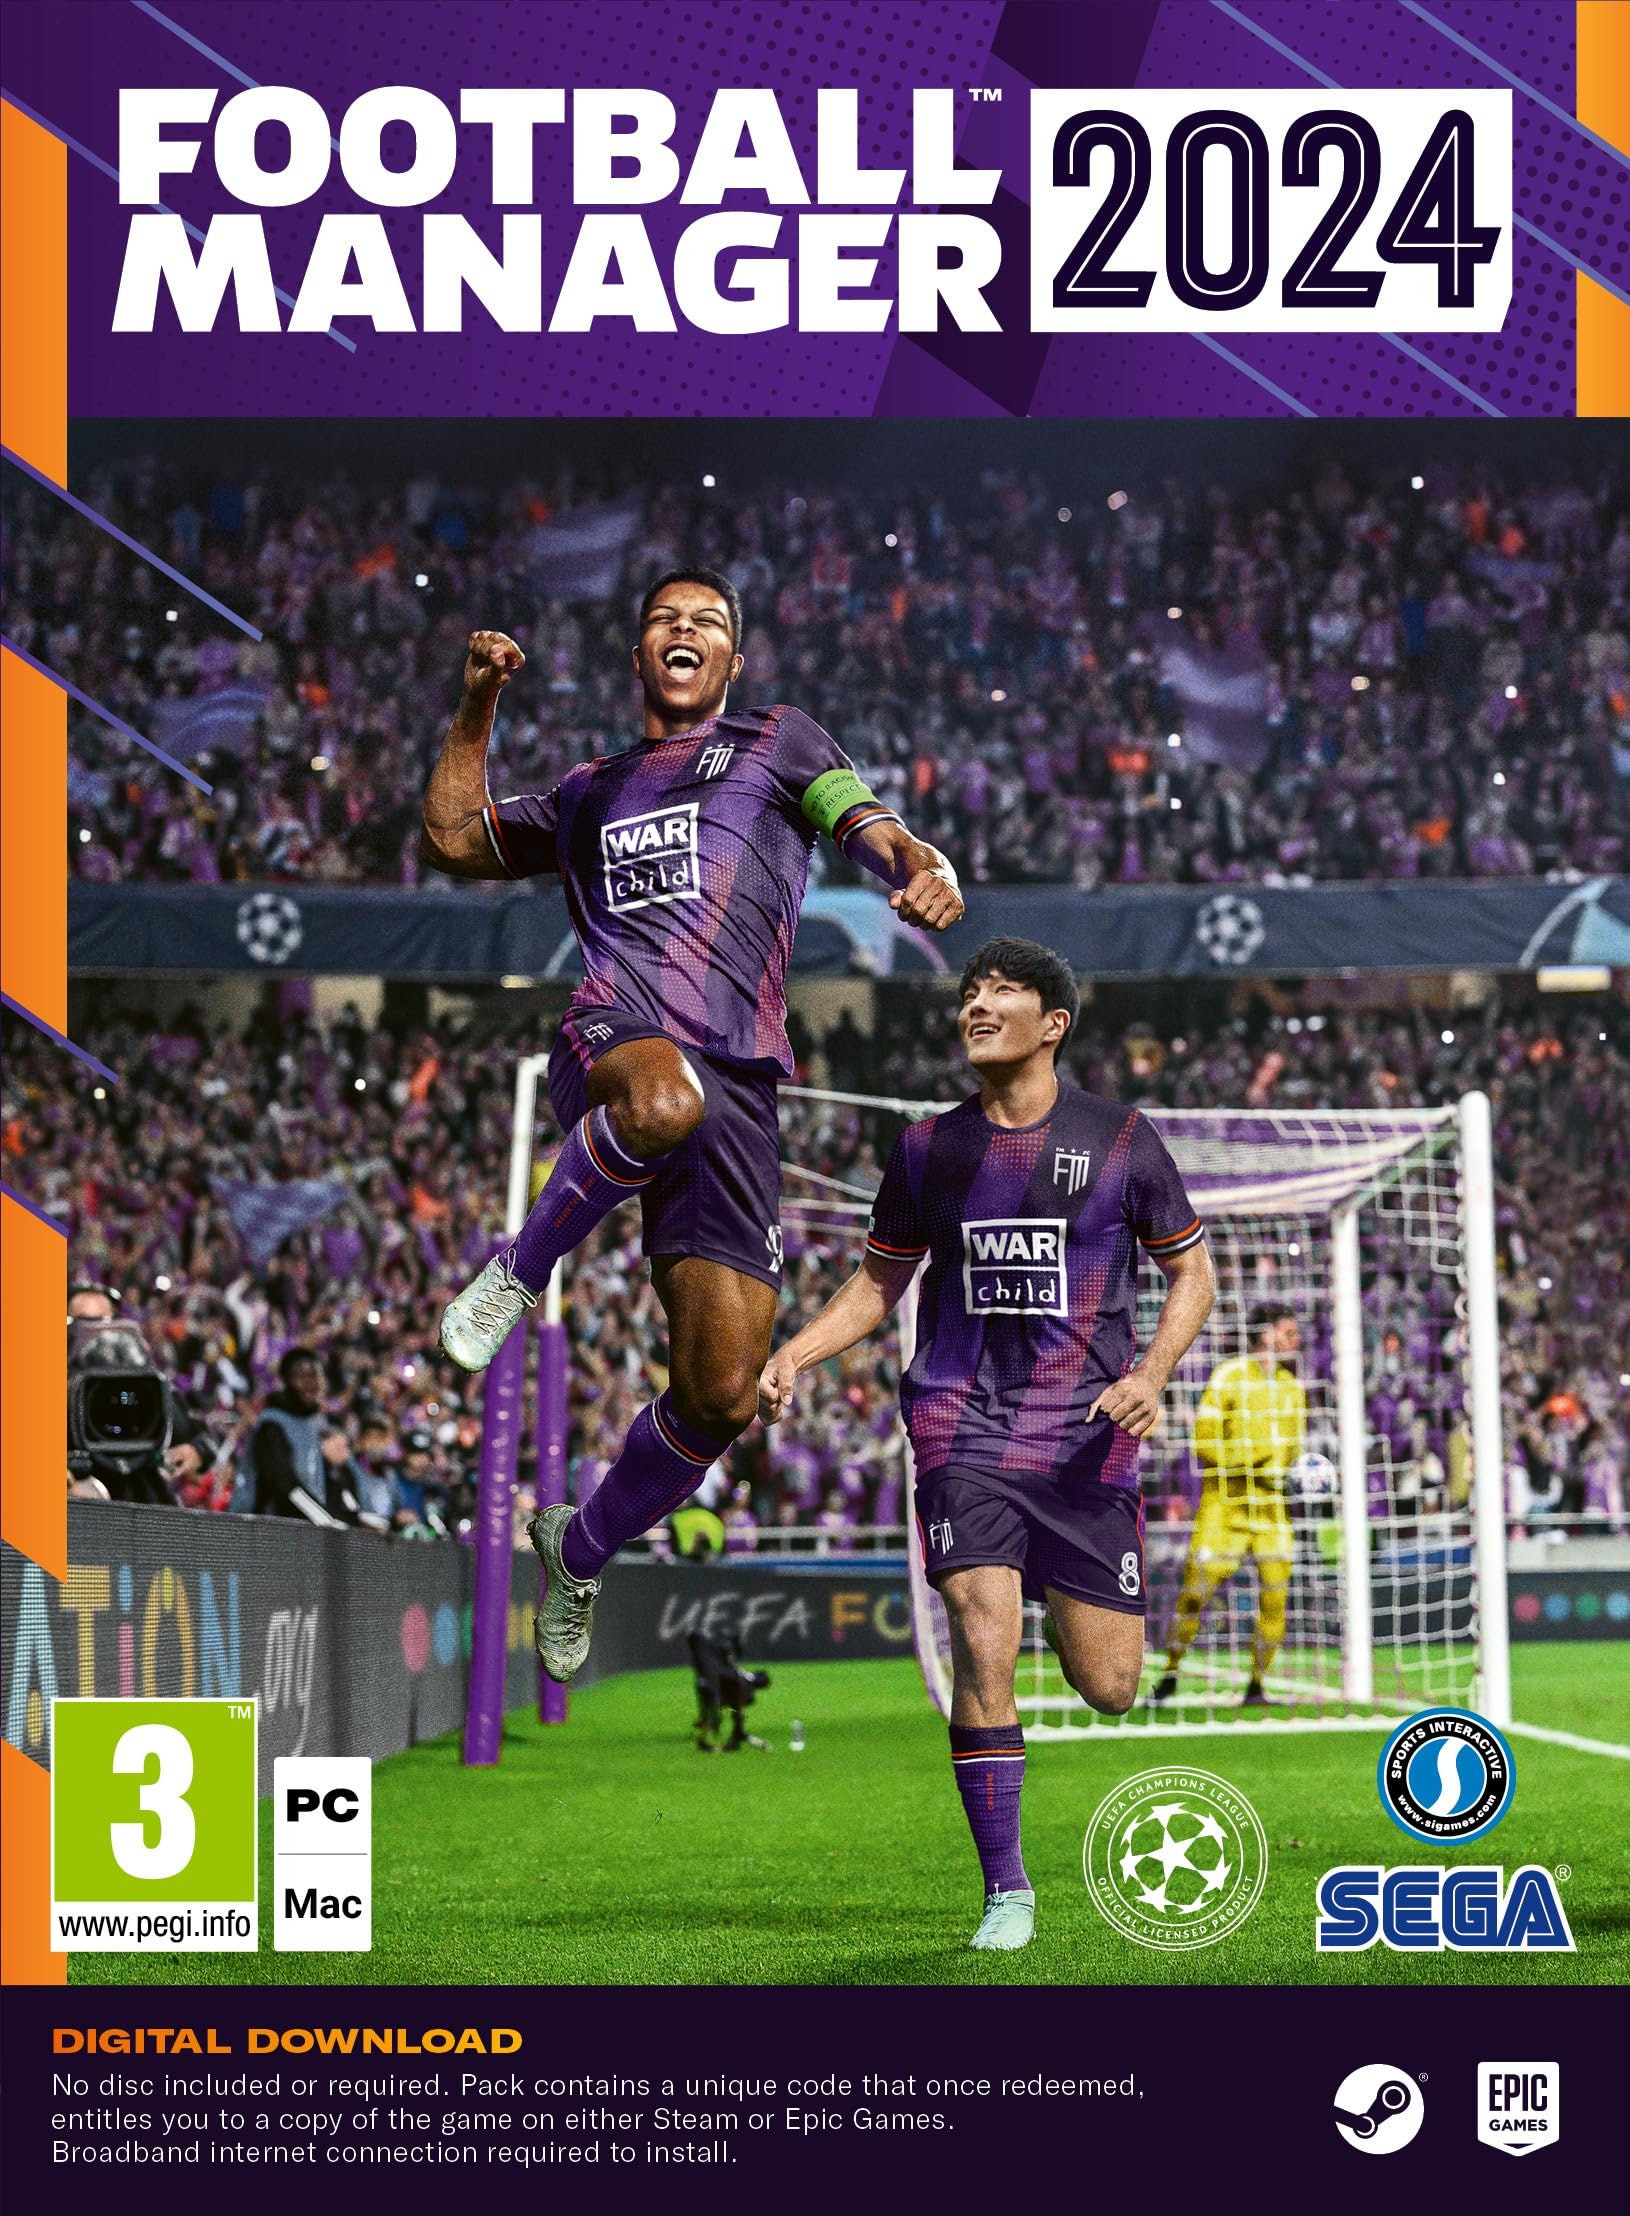 Save 20% on Football Manager 2024 on Steam